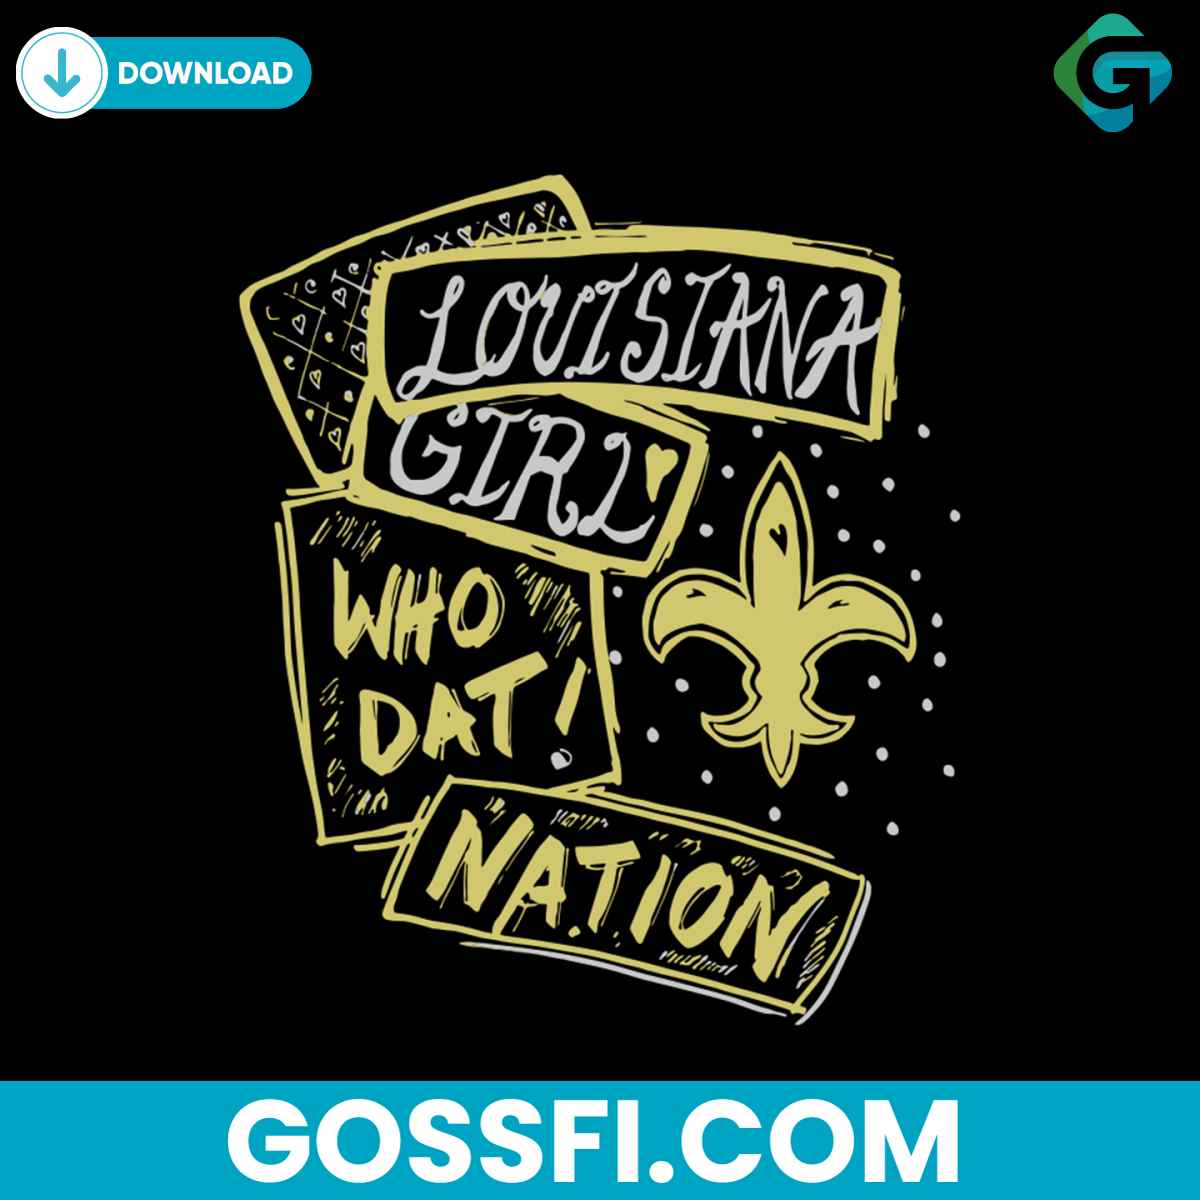 new-orleans-saints-louisiana-girl-who-dat-nation-svg